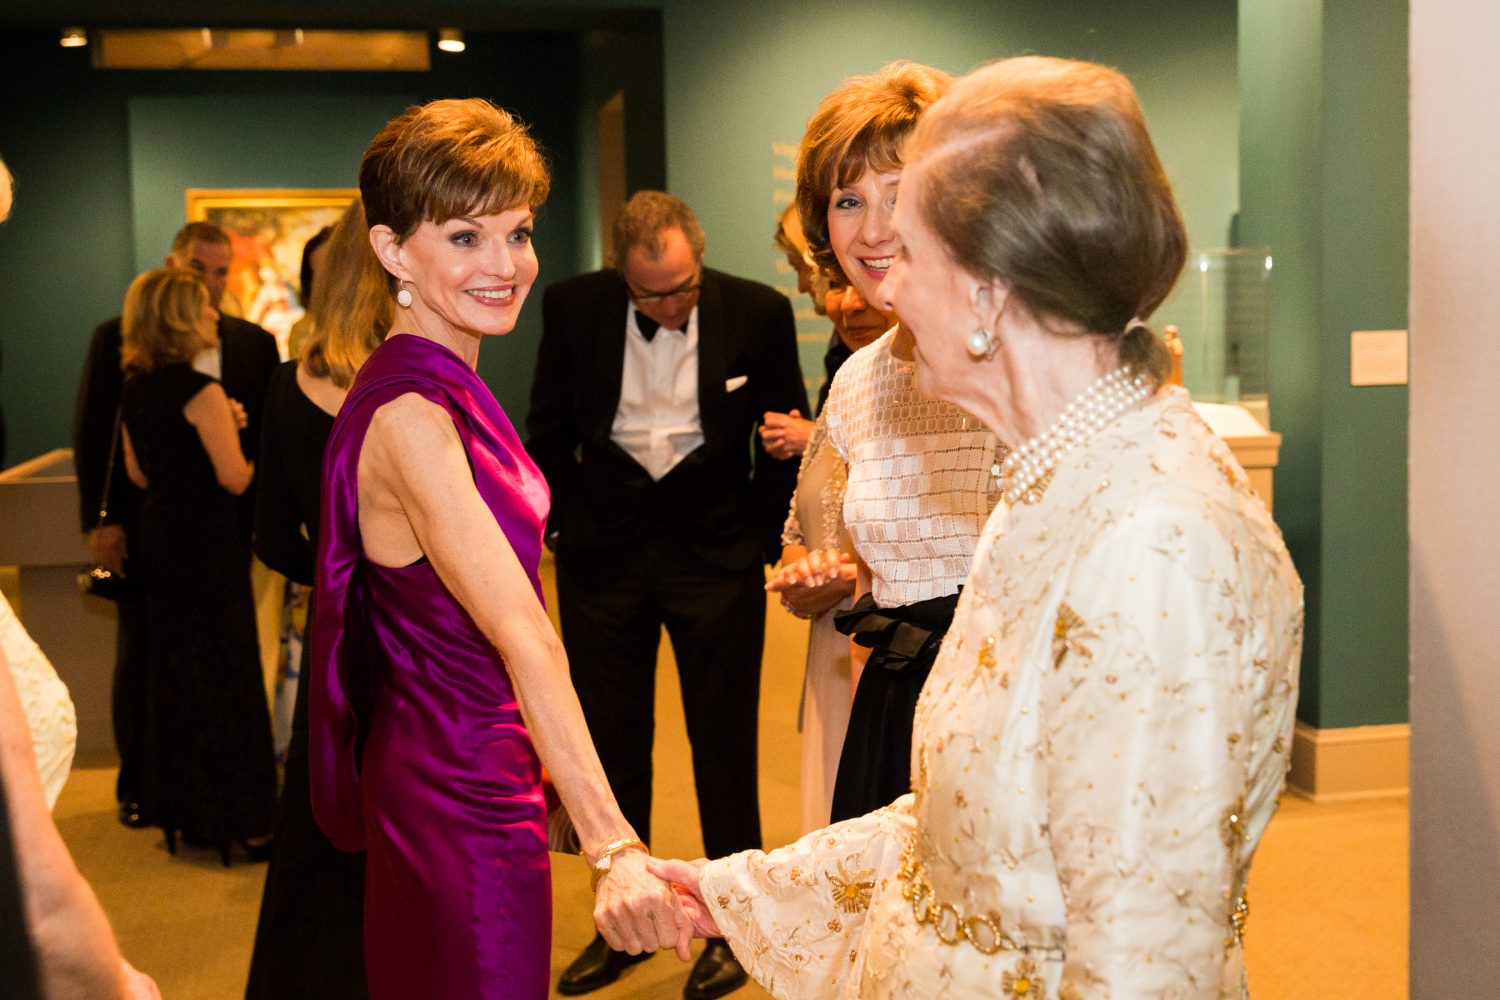 A woman with light skin and brown hair wearing a violet-colored sleeveless dress shakes hands with a woman with light skin wearing a gold dress at a formal party.